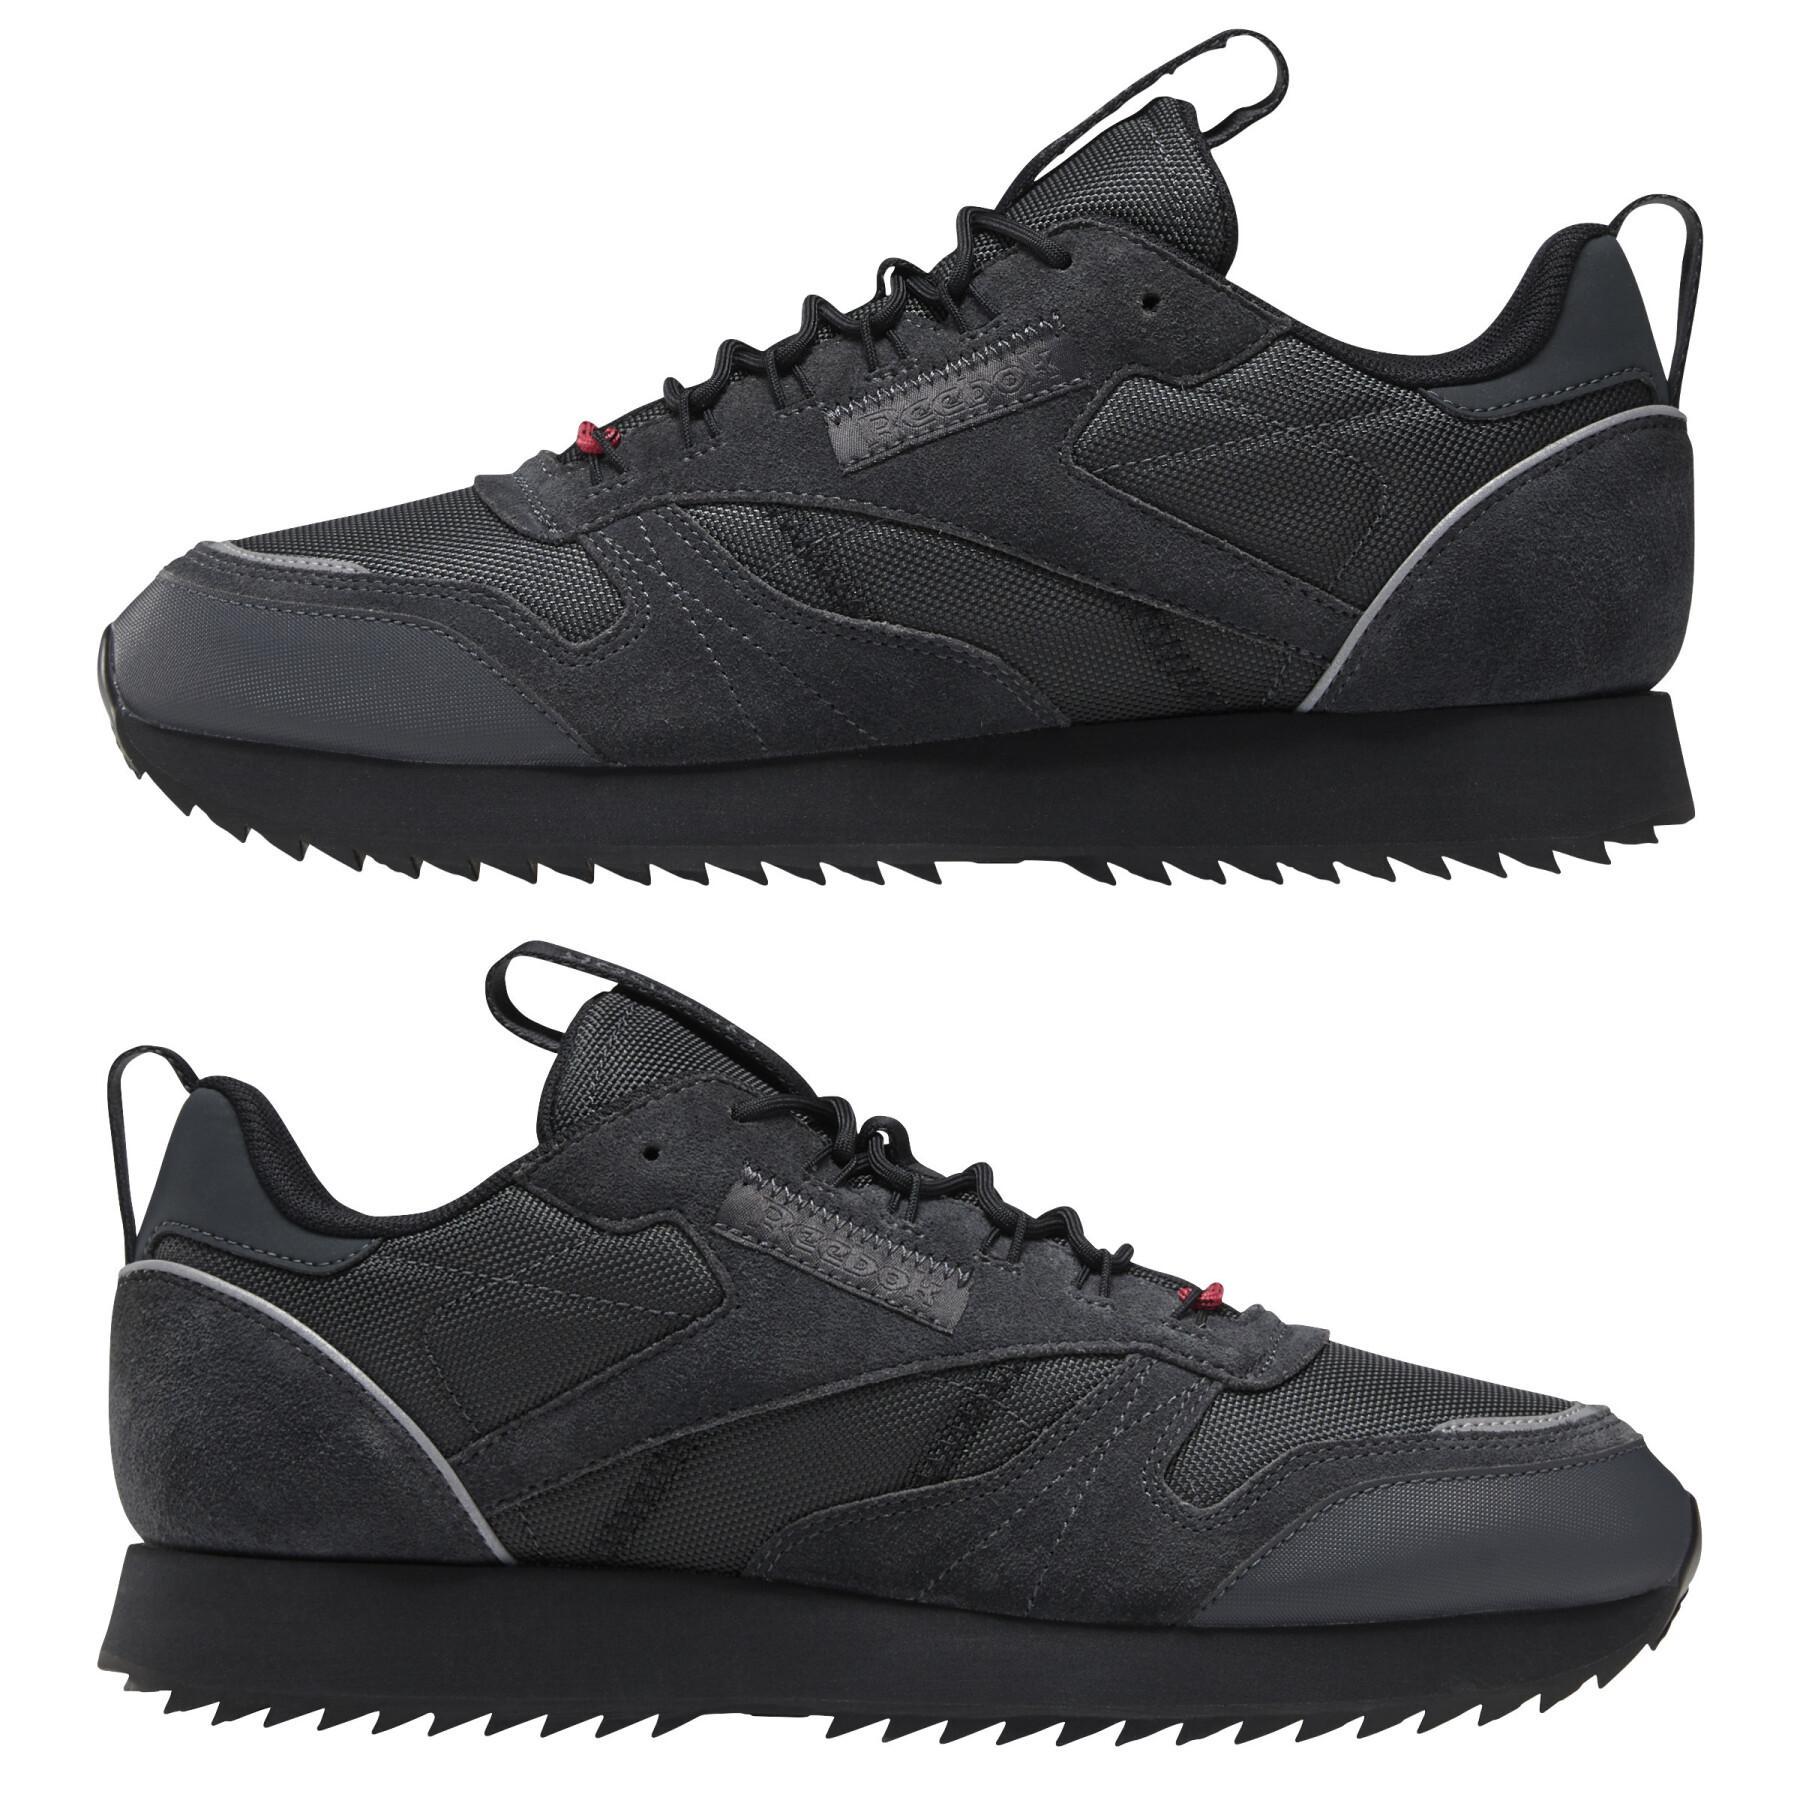 Formadores Reebok Classics Leather Ripple Trail